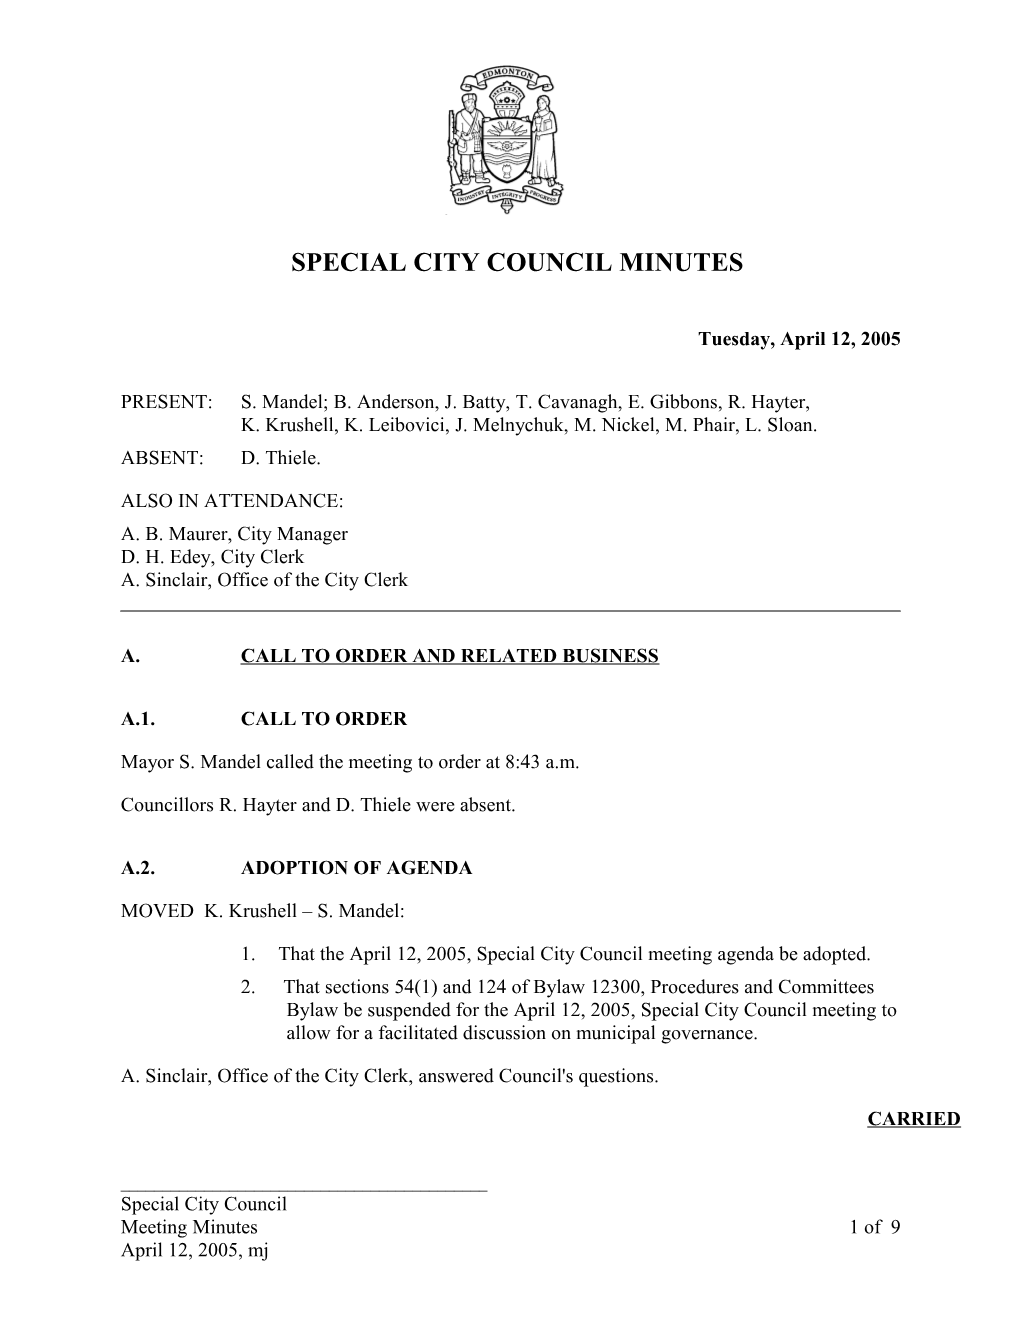 Minutes for City Council April 12, 2005 Meeting